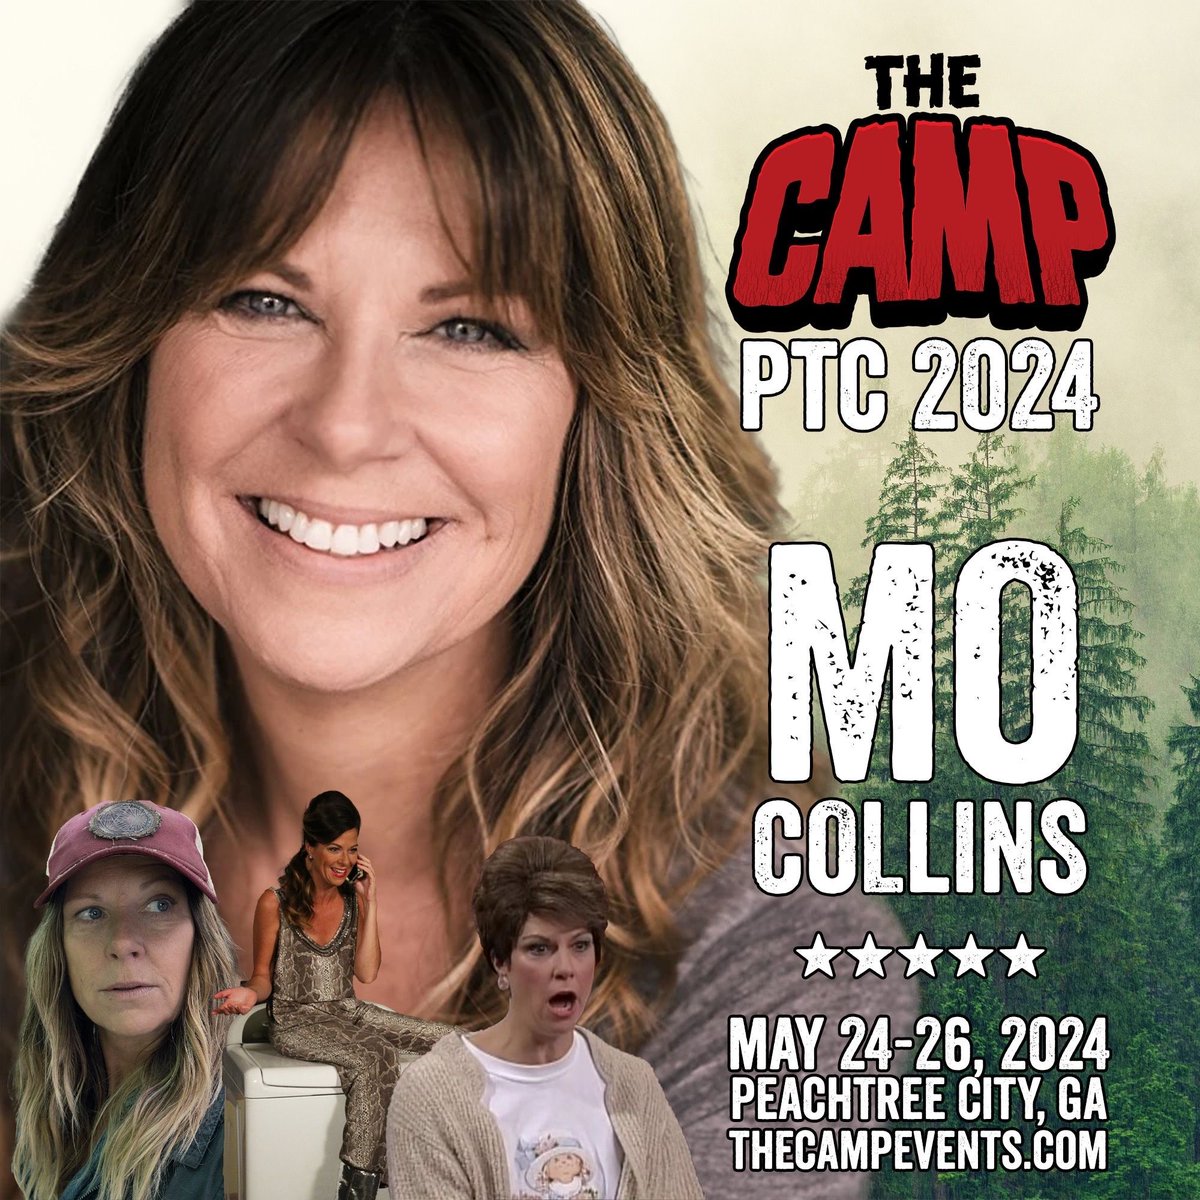 .@THEMOCOLLINS (Fear The Walking Dead, #MadTV, #ParksAndRec) @TheCampEvents #Atlanta #Georgia #ComicCon MAY 24-26 thecampevents.com

@AMC_TV @FearTWD @WalkingDead_AMC @TheWalkingDead #FearTWD #TheWalkingDead #WalkingDead #TWD #TWDFamily #Zombies #Horror